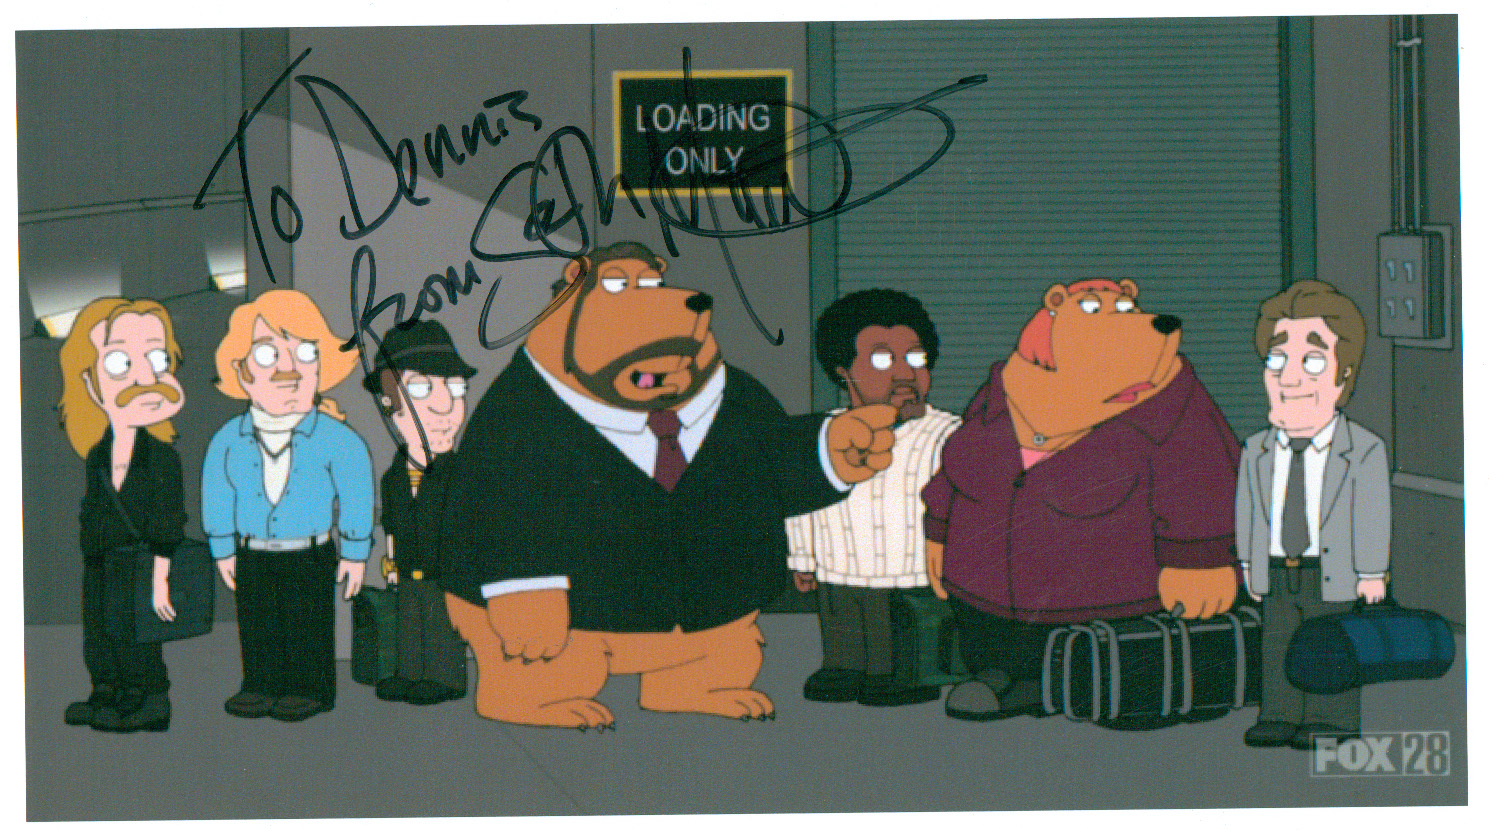 Seth MacFarlane took My Character from DIE HARD #1 Eddie and Called him the Guy Who Looks Like Huey Lewis, and to insult me he Hired Huey Lewis to Voice over my Character, so I had a mutual friend get me his autograph, and Huey gets all the Money